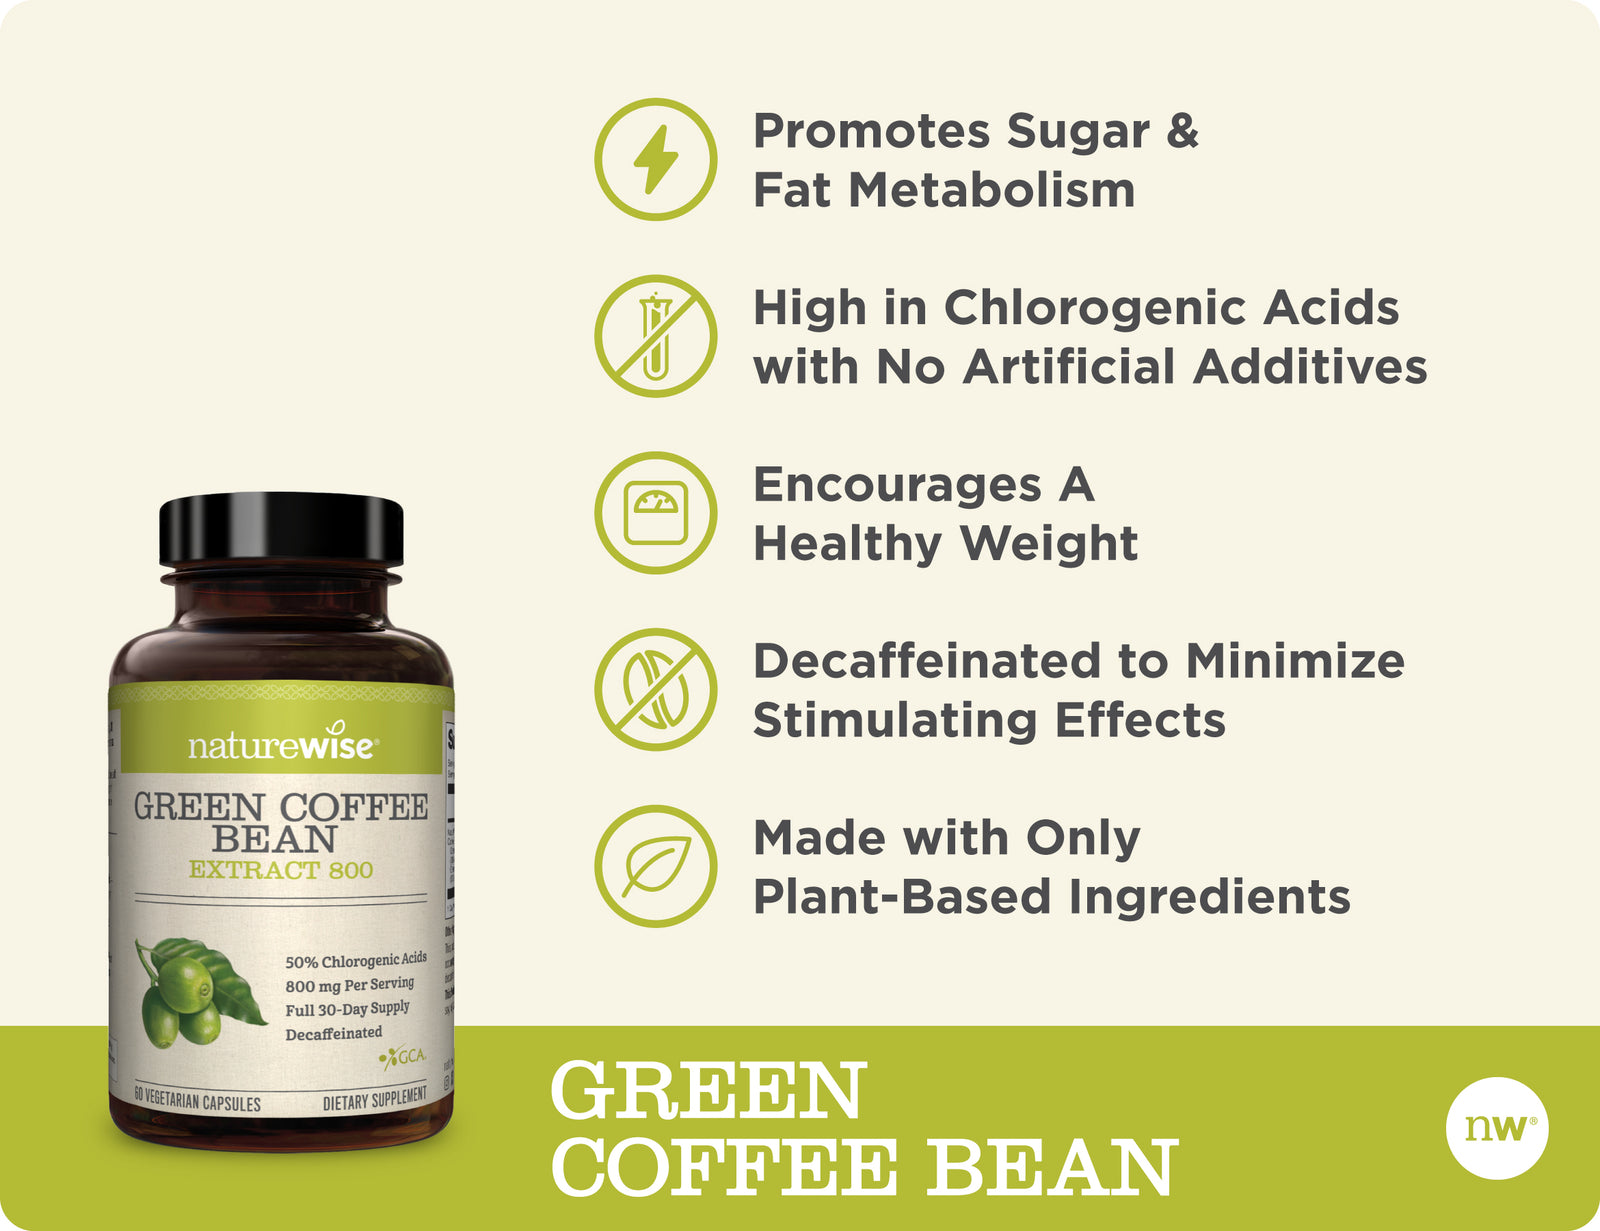 Green Coffee Bean Extract icons